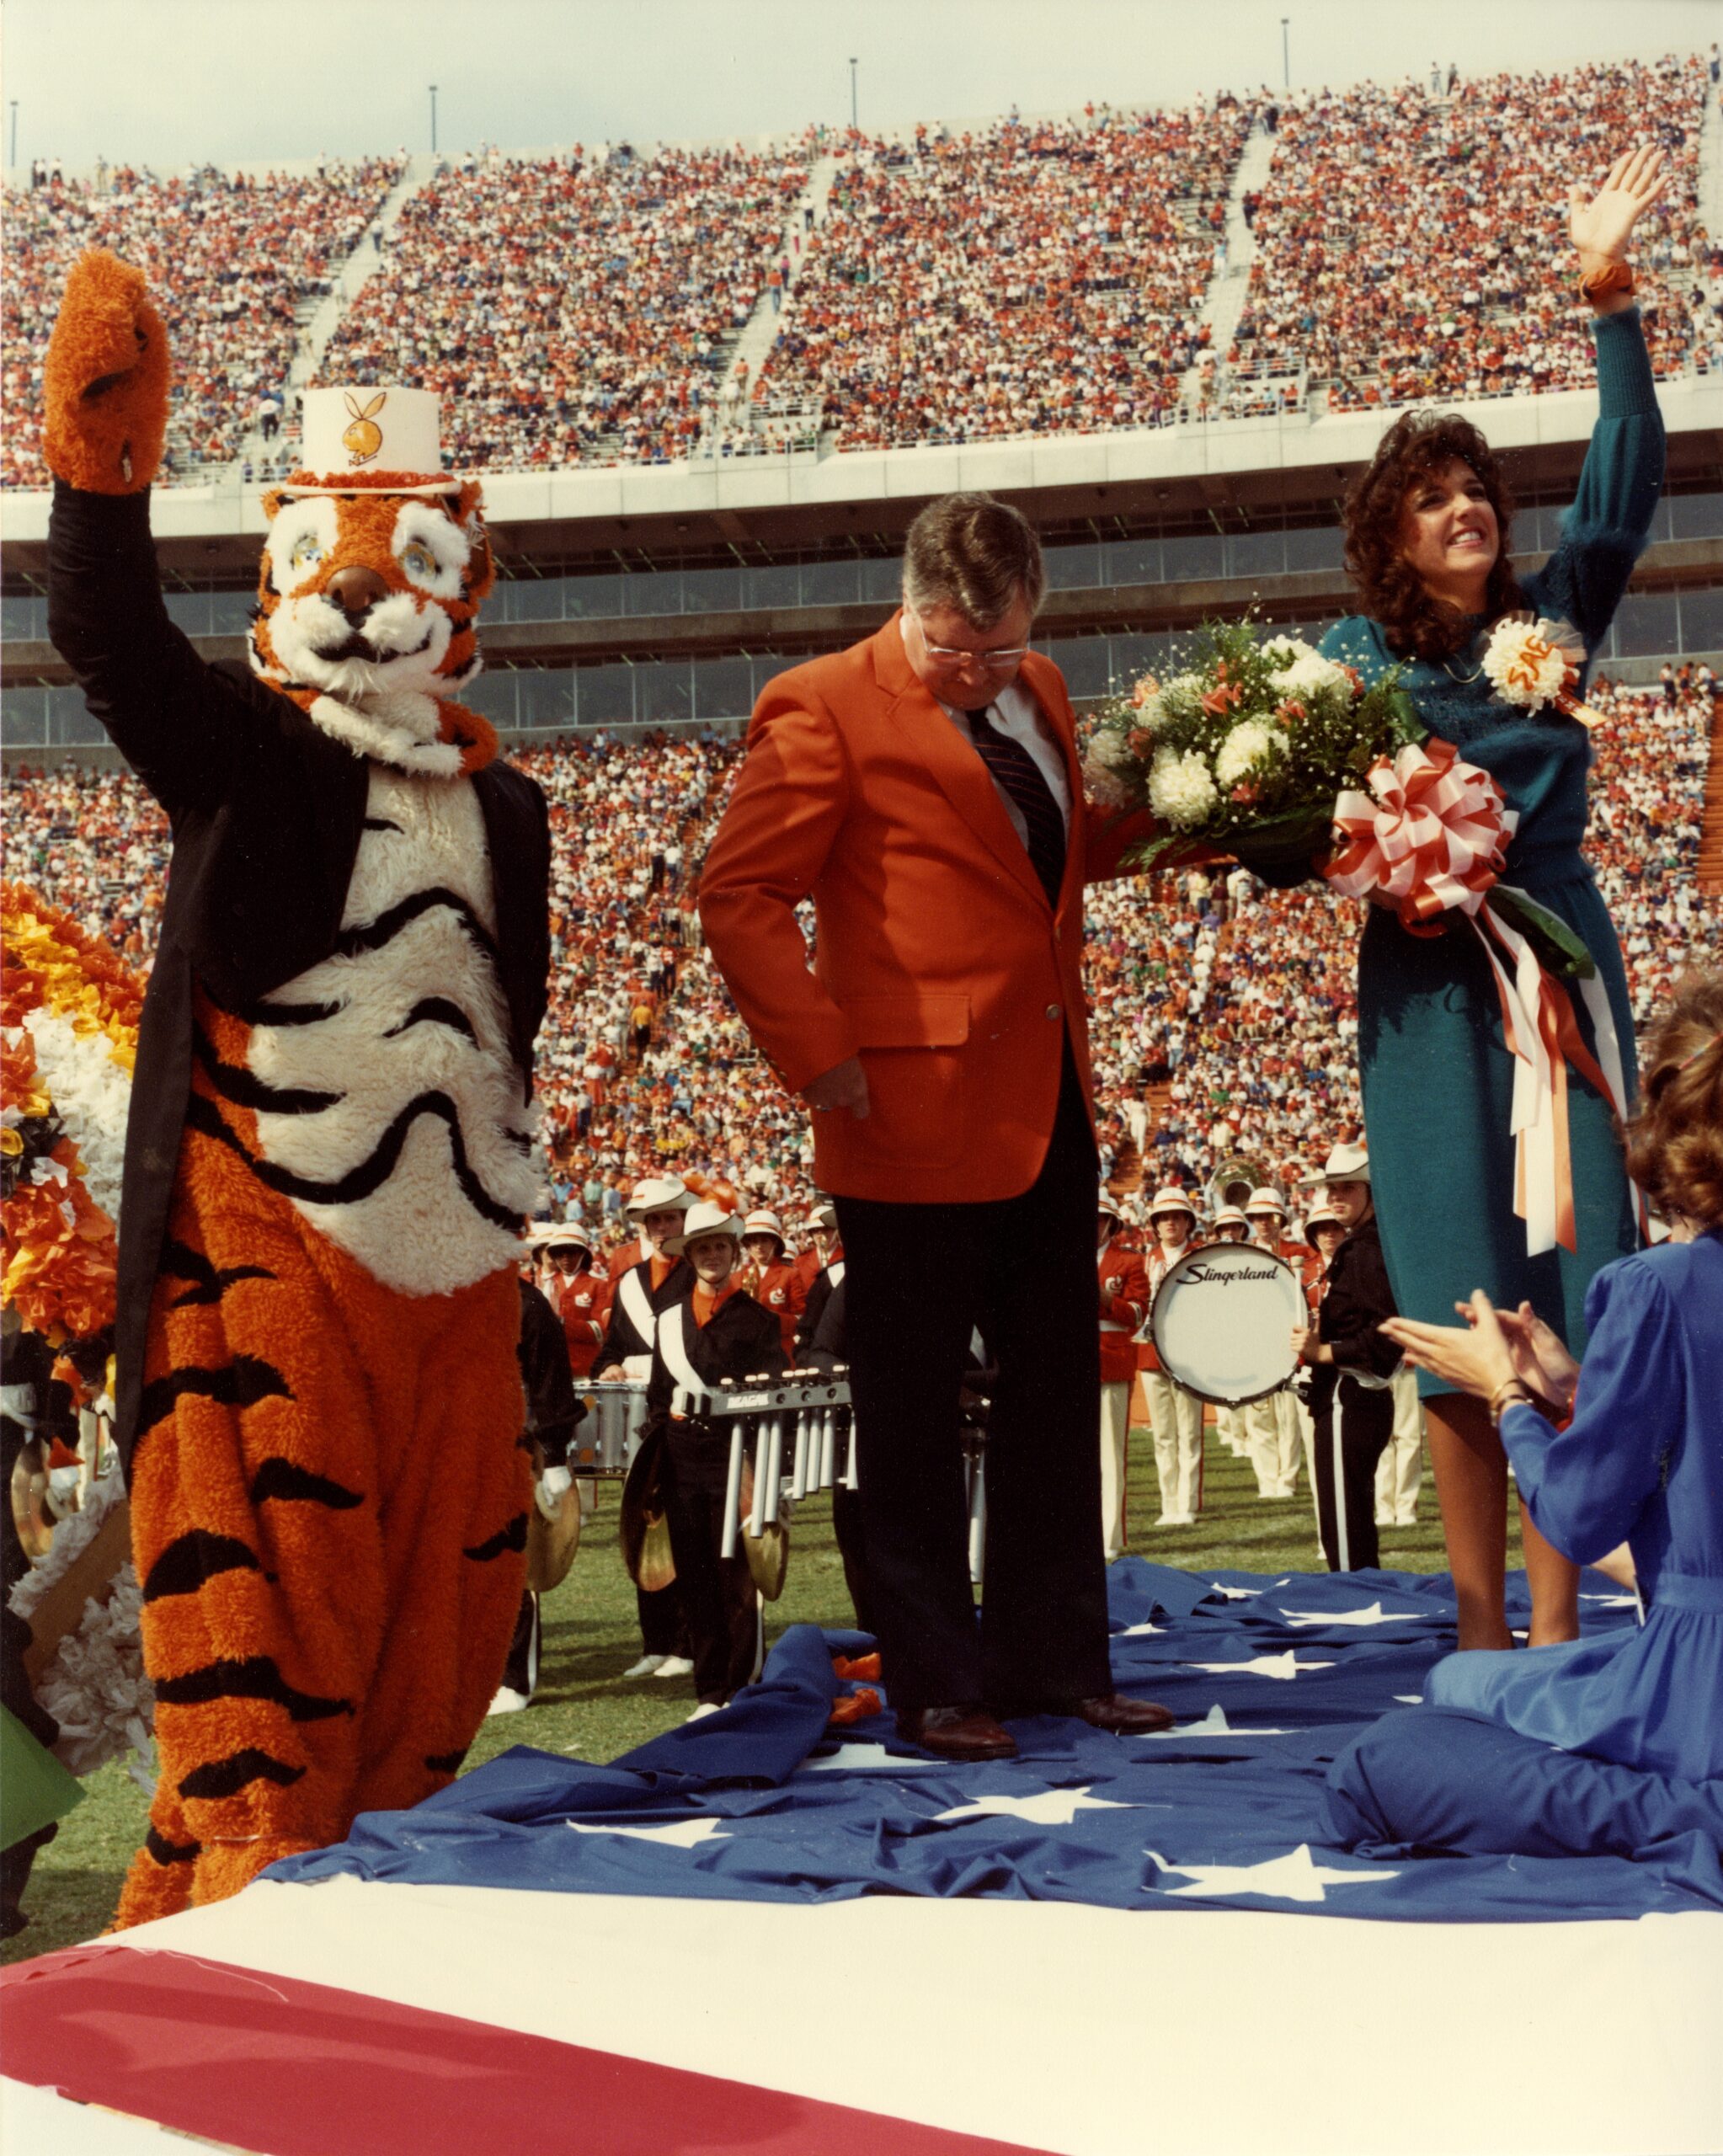 Miss Homecoming is honored during a Clemson football game in the 1980s